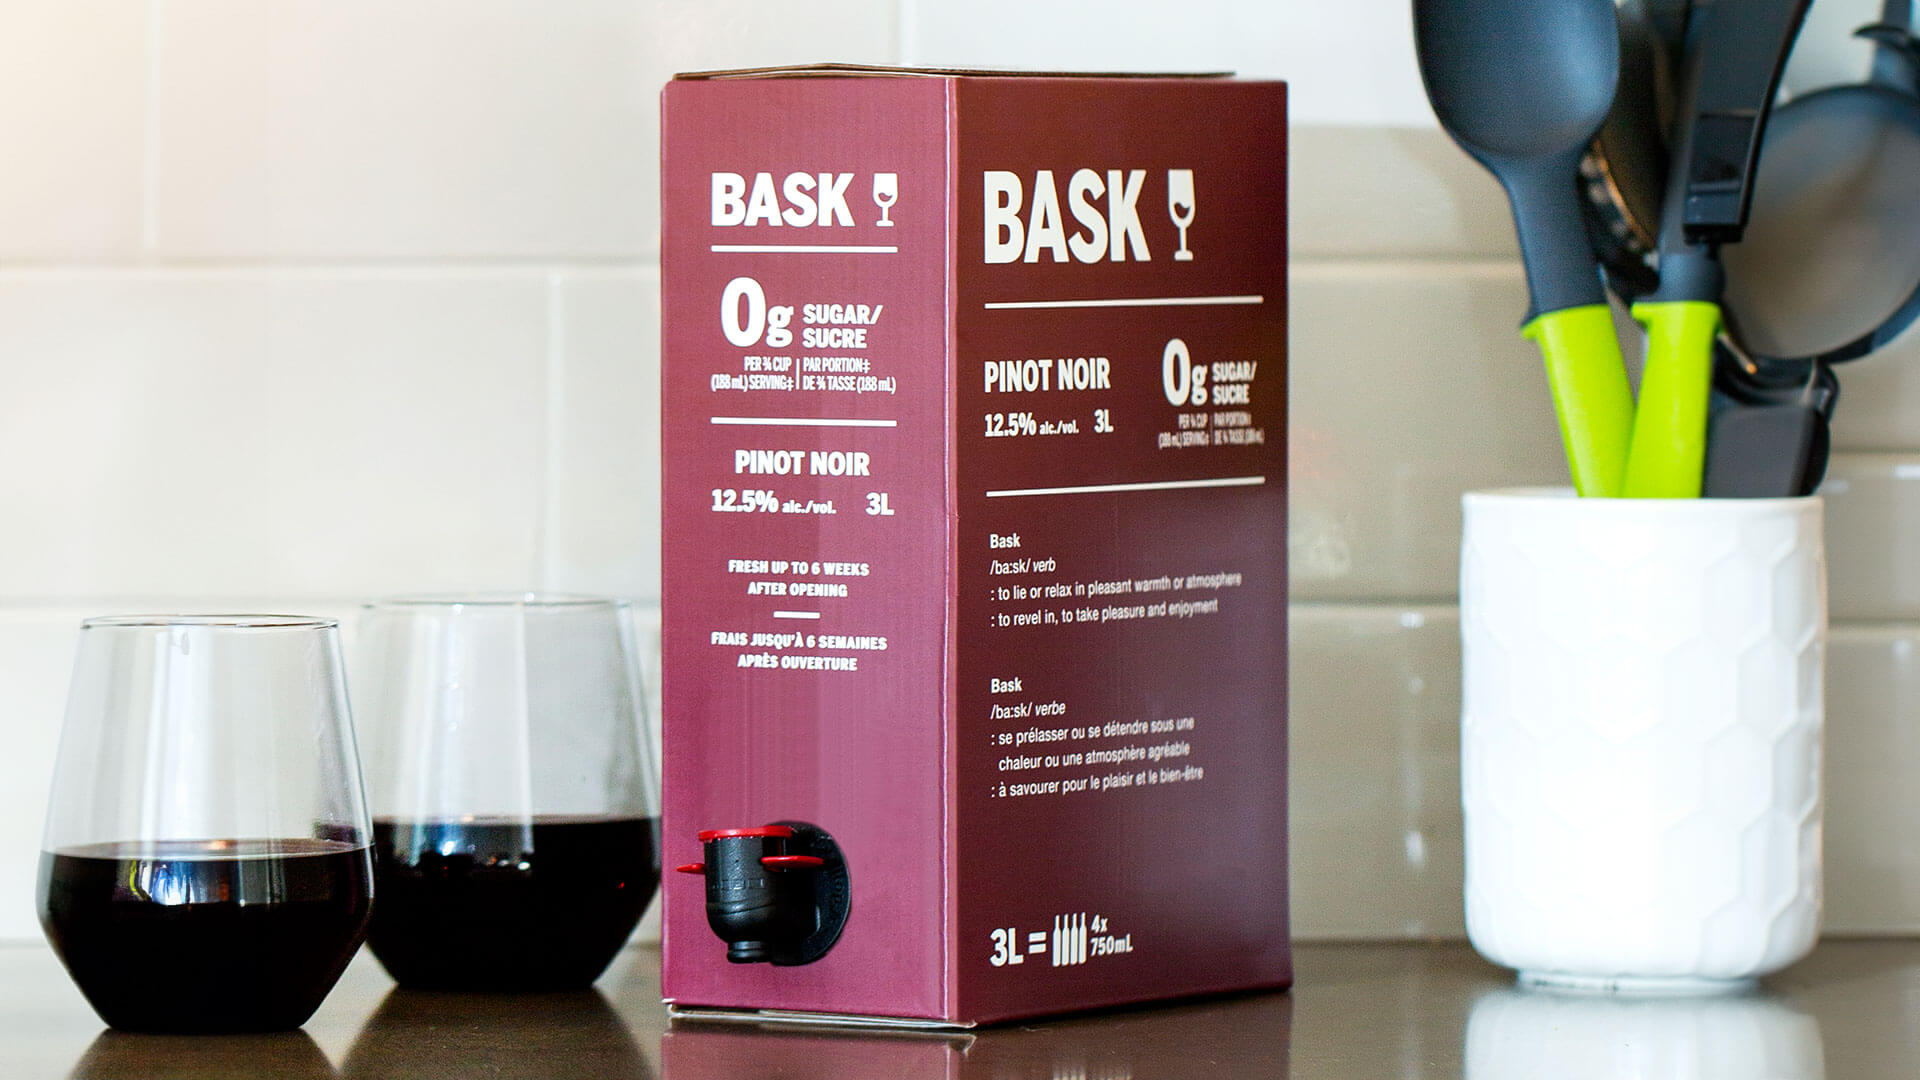 Bask Pinot Noir 3L box with red wine glasses on kitchen counter.